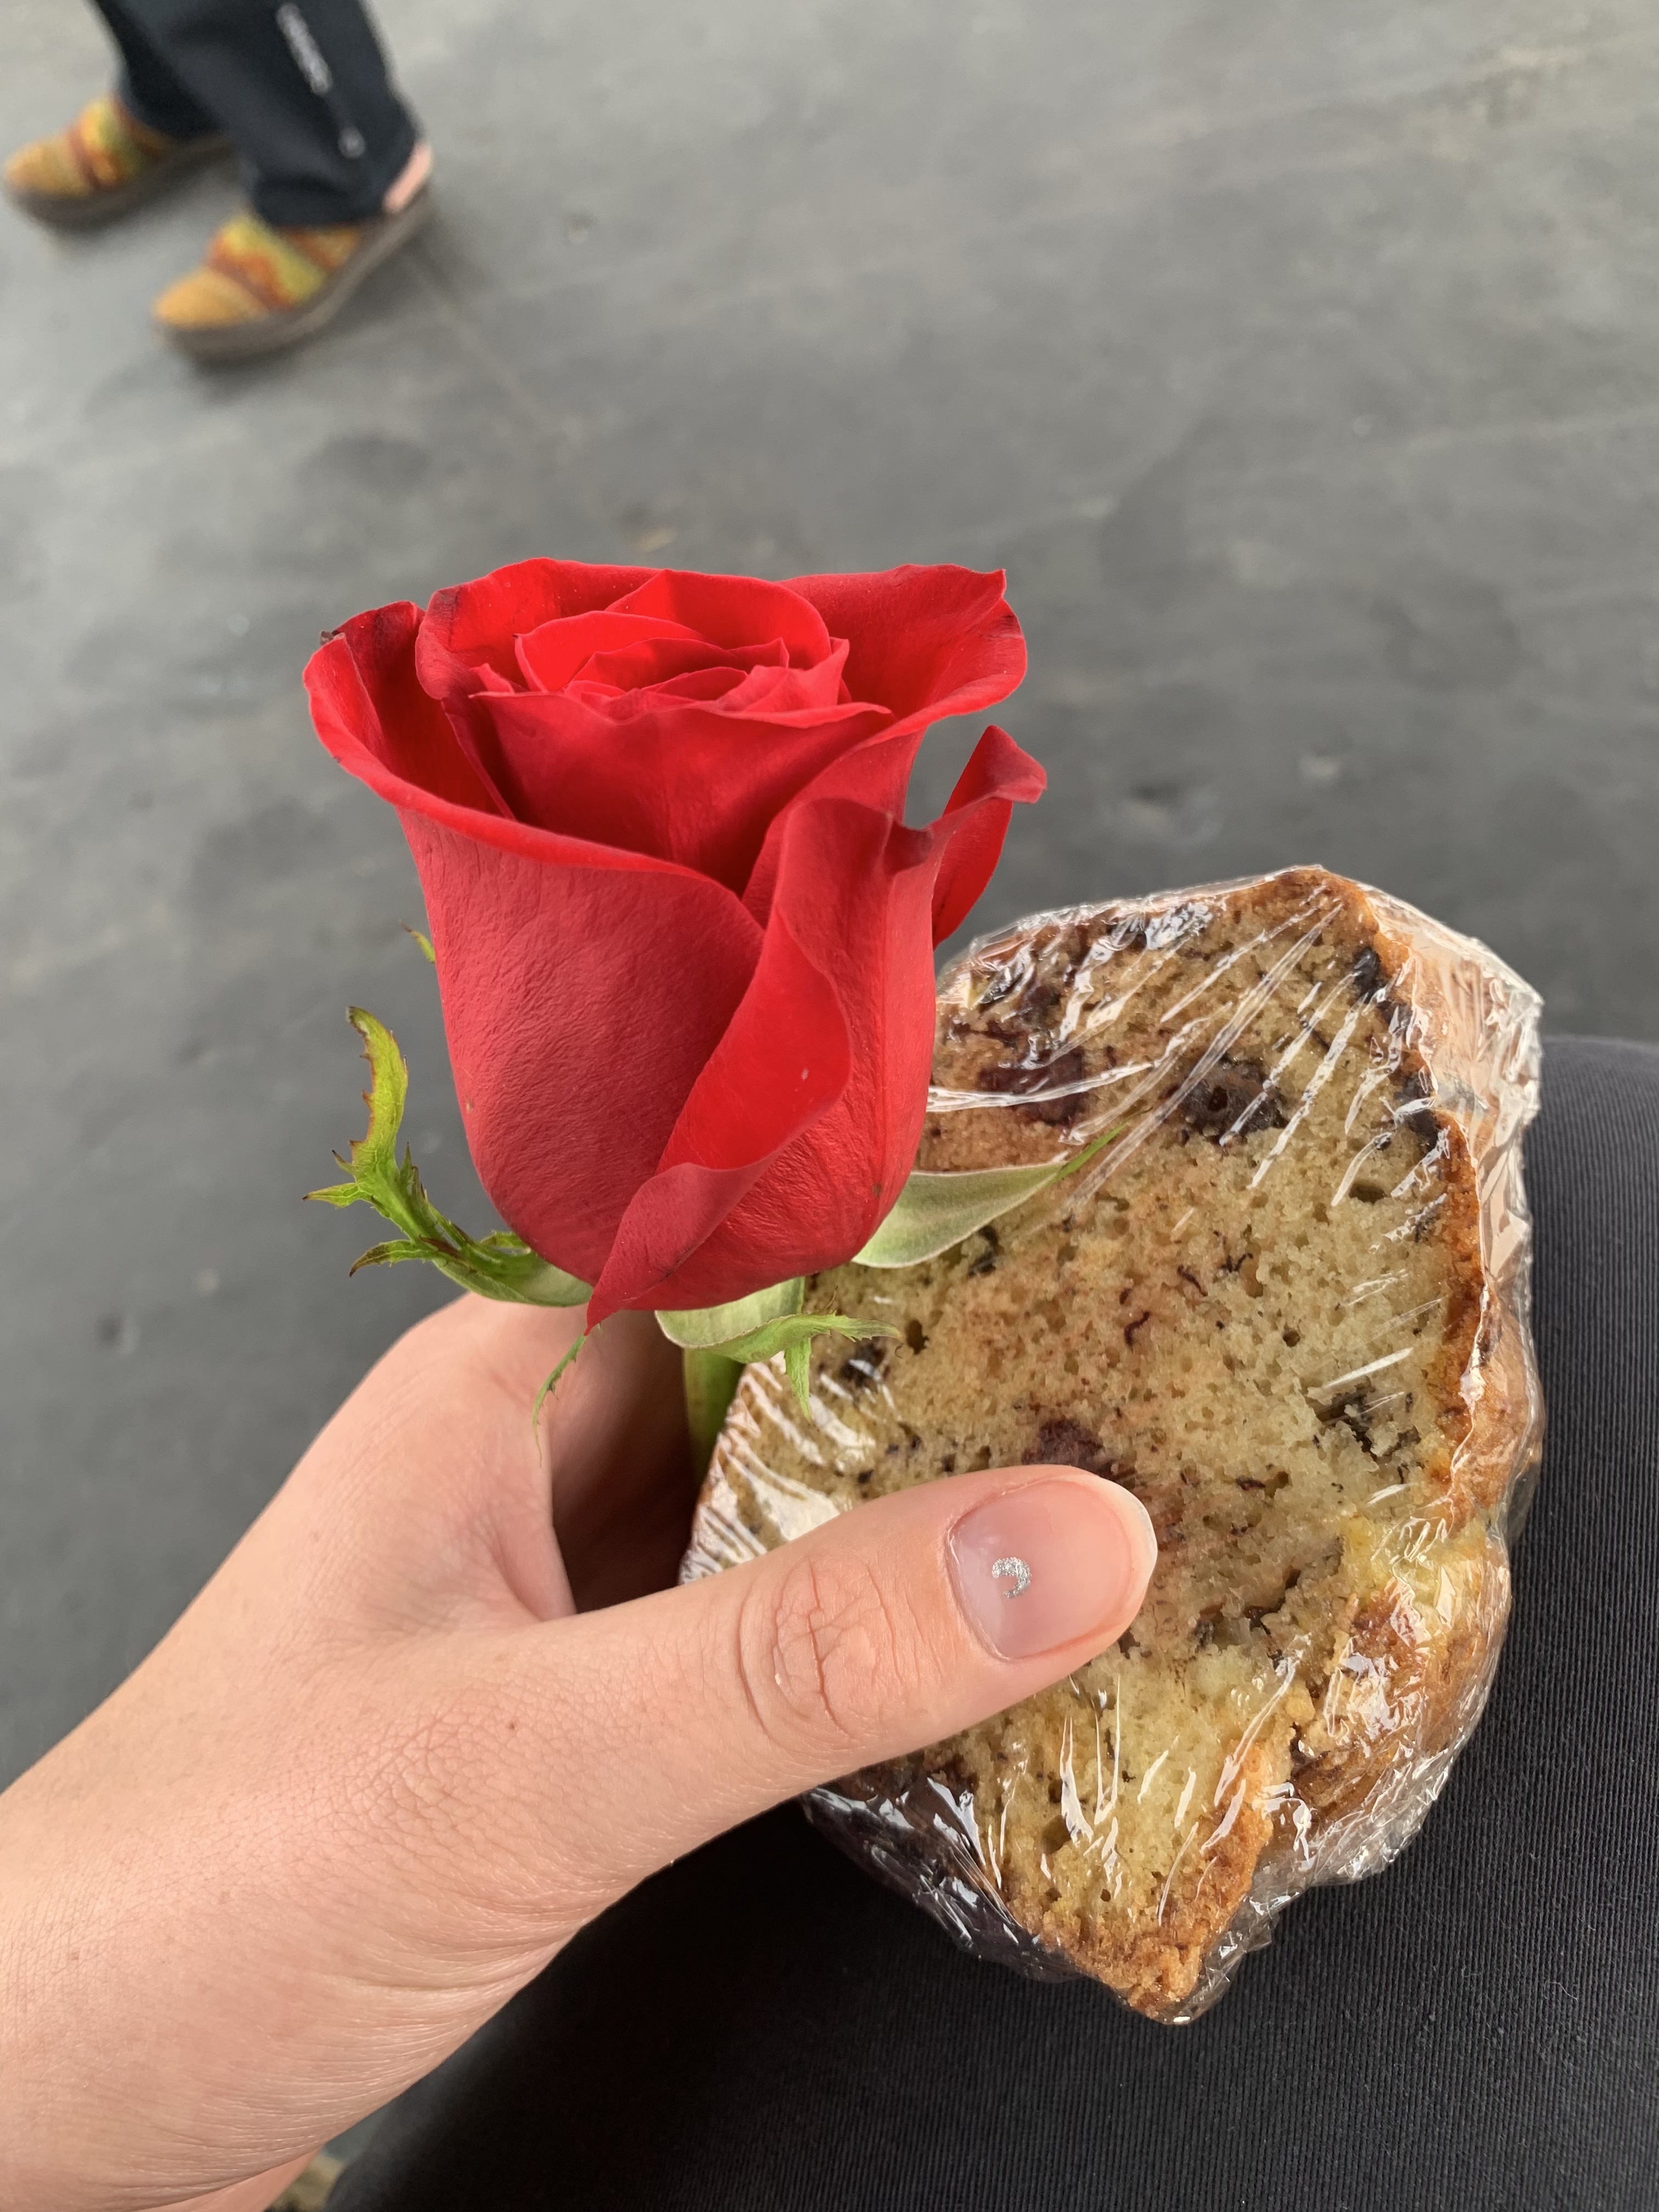 Red rose and a slice of banana bread.